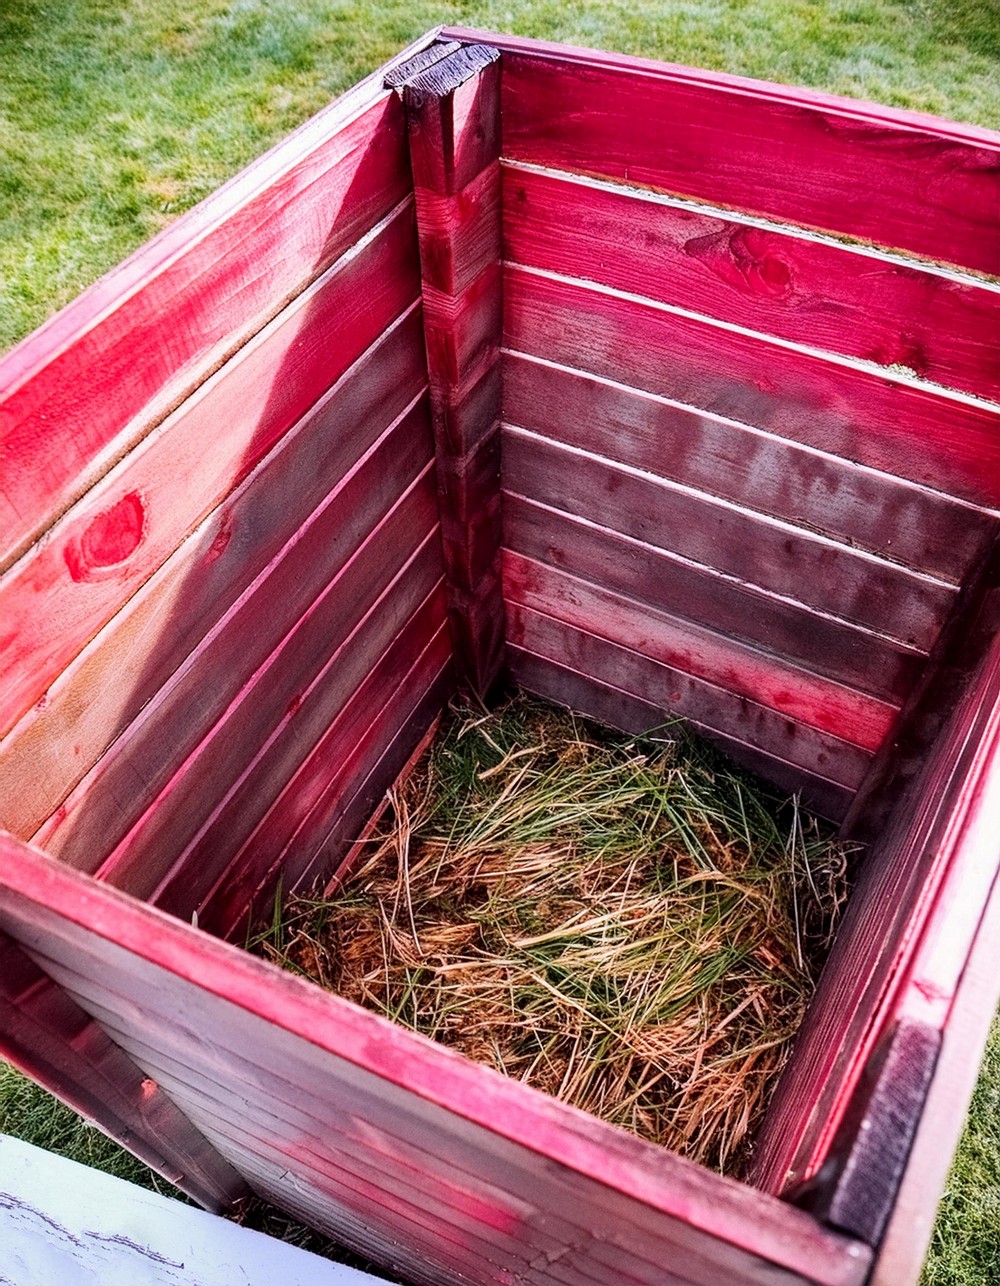 Compost Bin From Pallet Collars, inside view from above